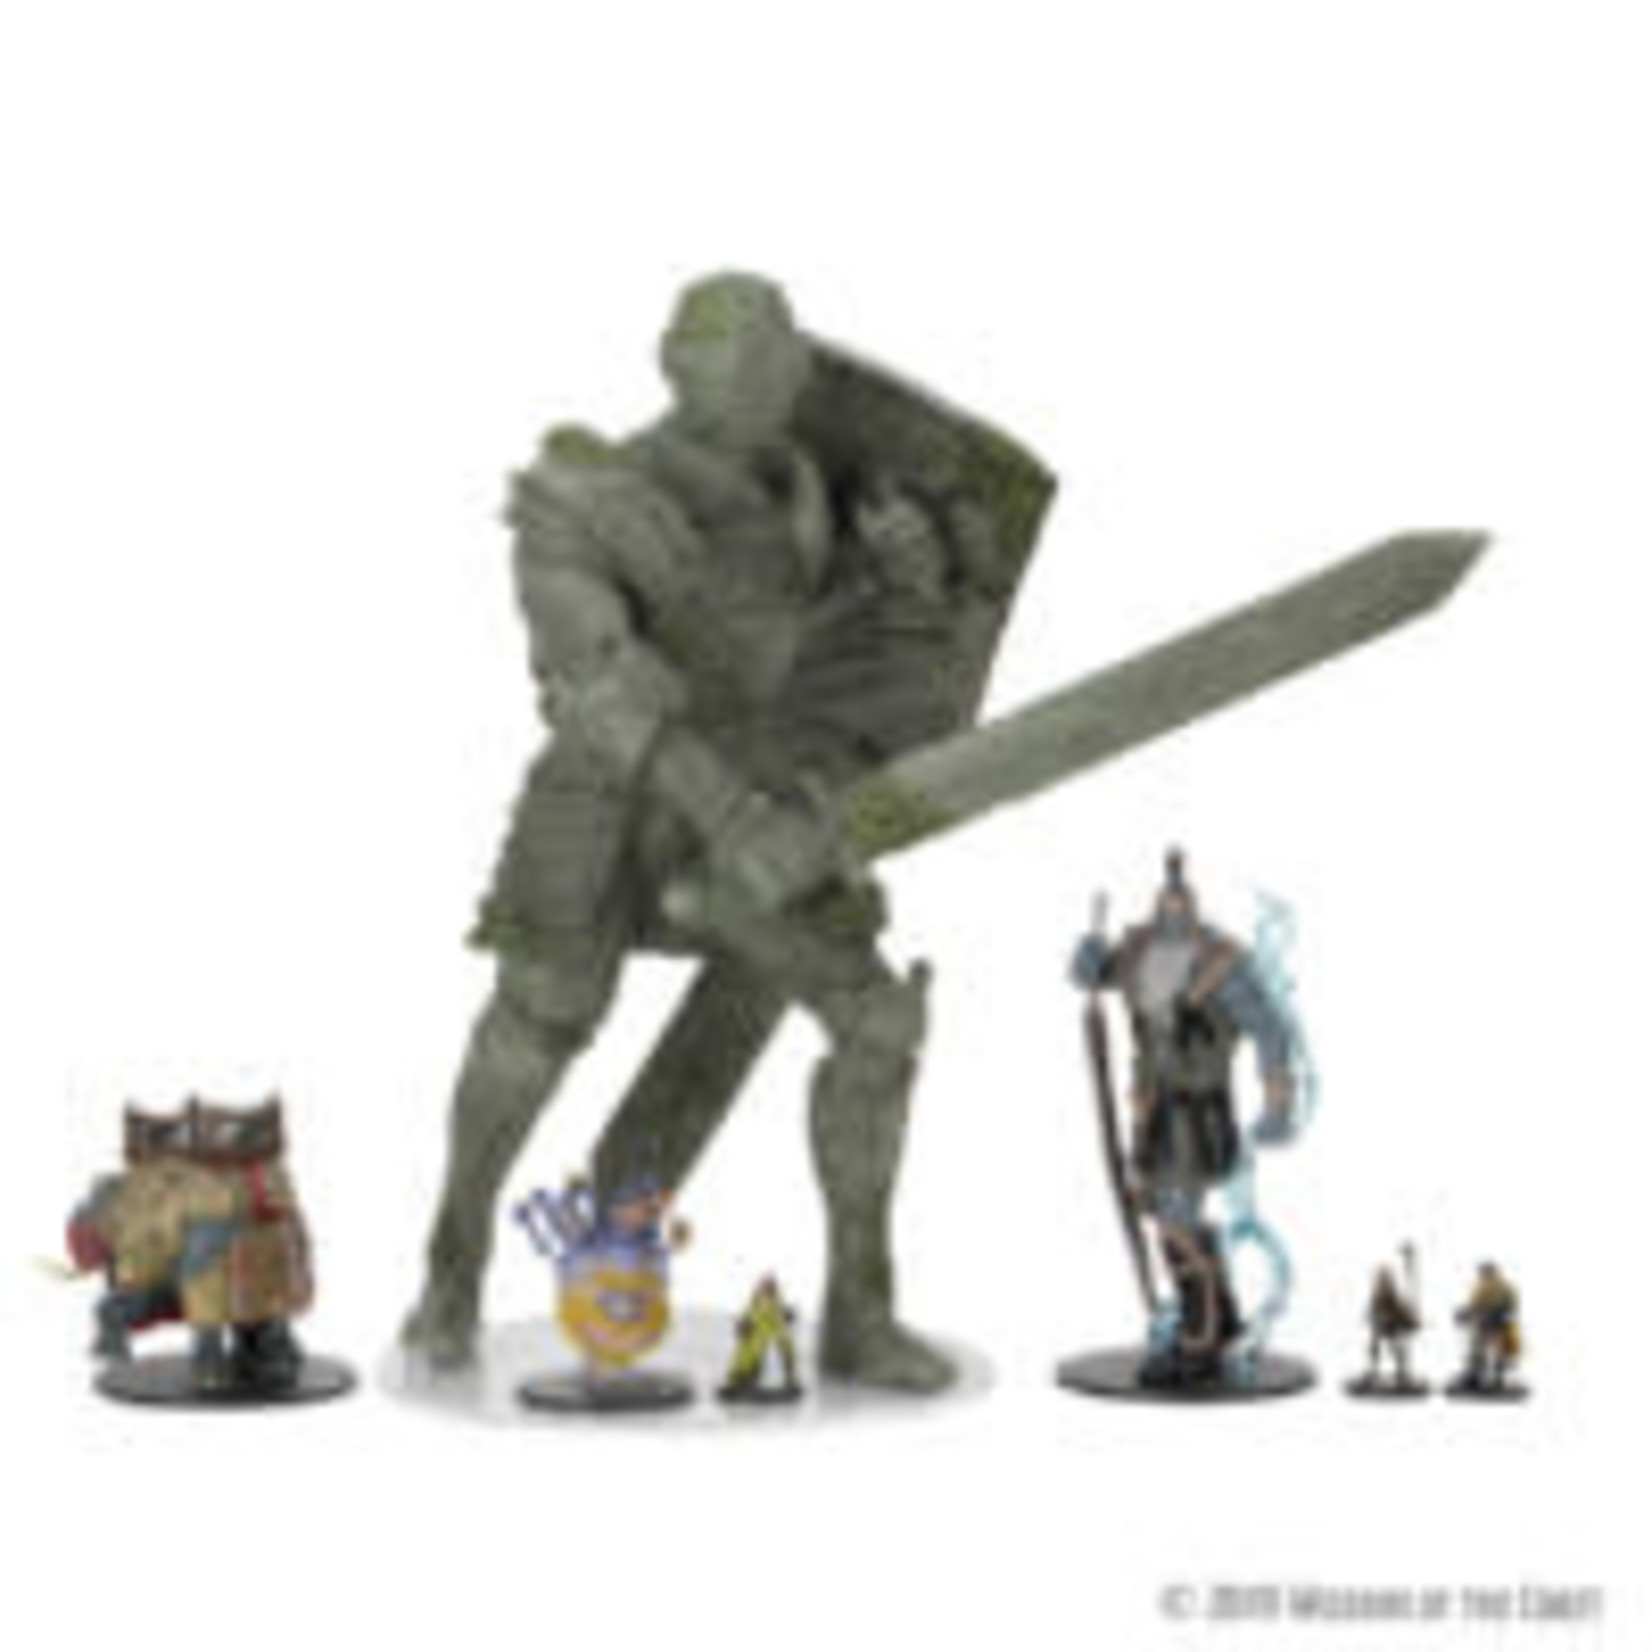 WizKids WizKids D&D Icons of the Realms Premium Figure: Walking Statue of Waterdeep – The Honorable Knight